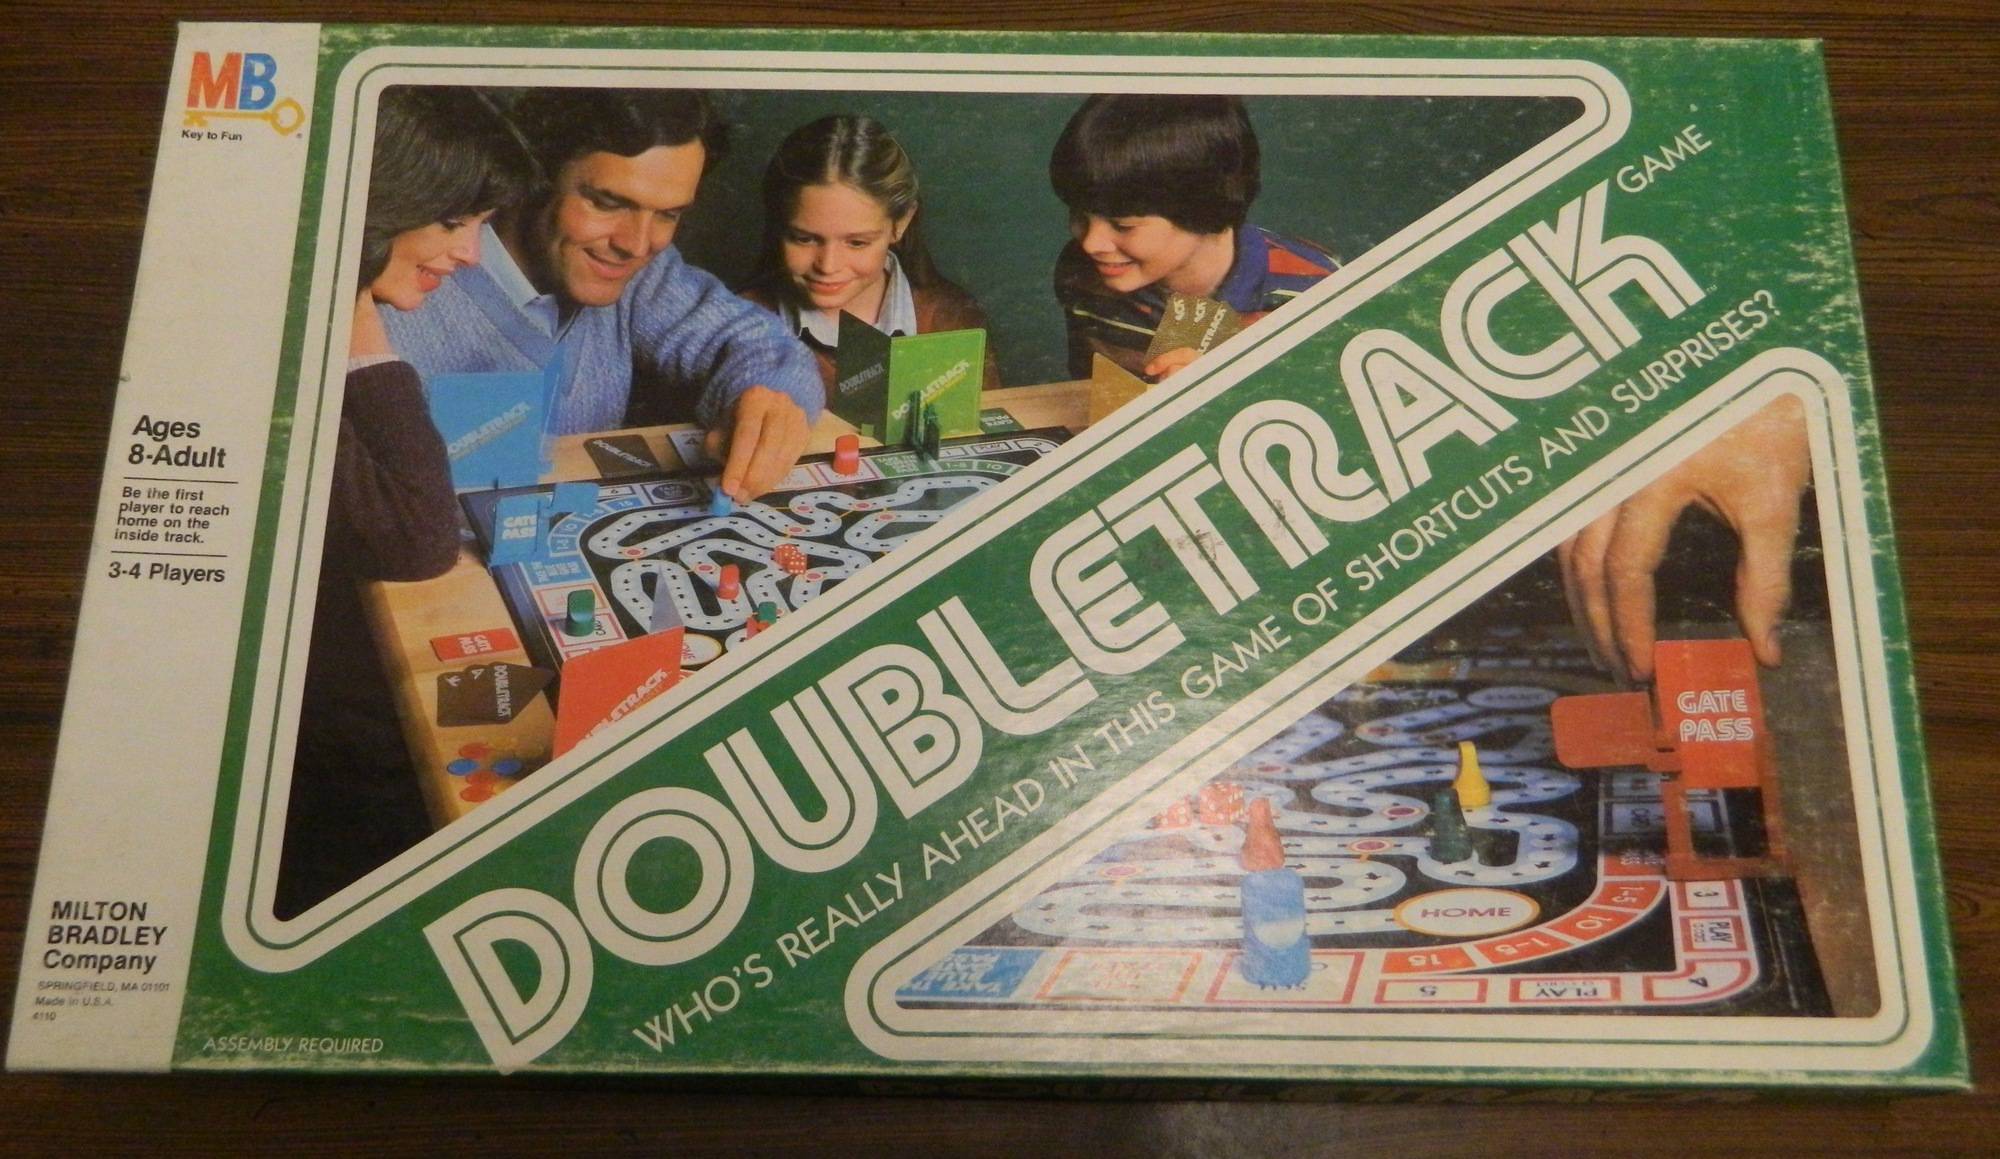 Box for Doubletrack